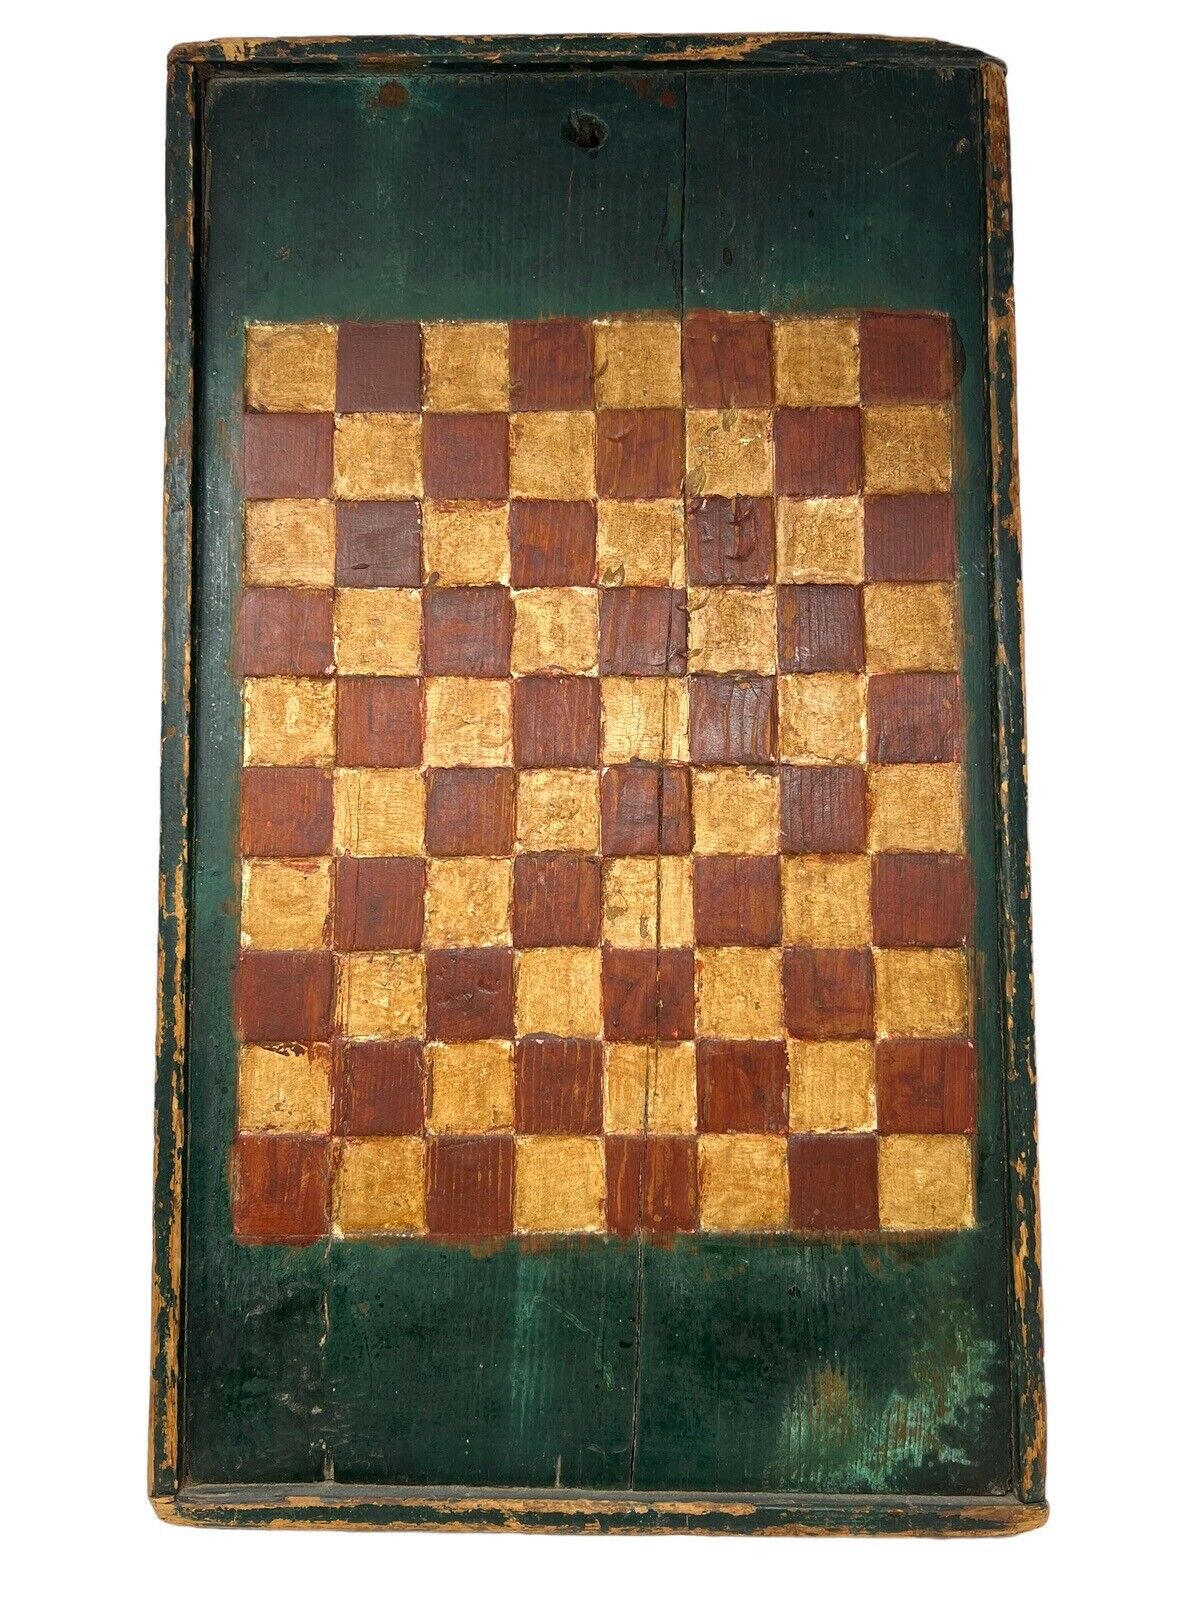 Large Antique 19th C. Old Green Painted Game Board Hand Carved Checkers 1800's